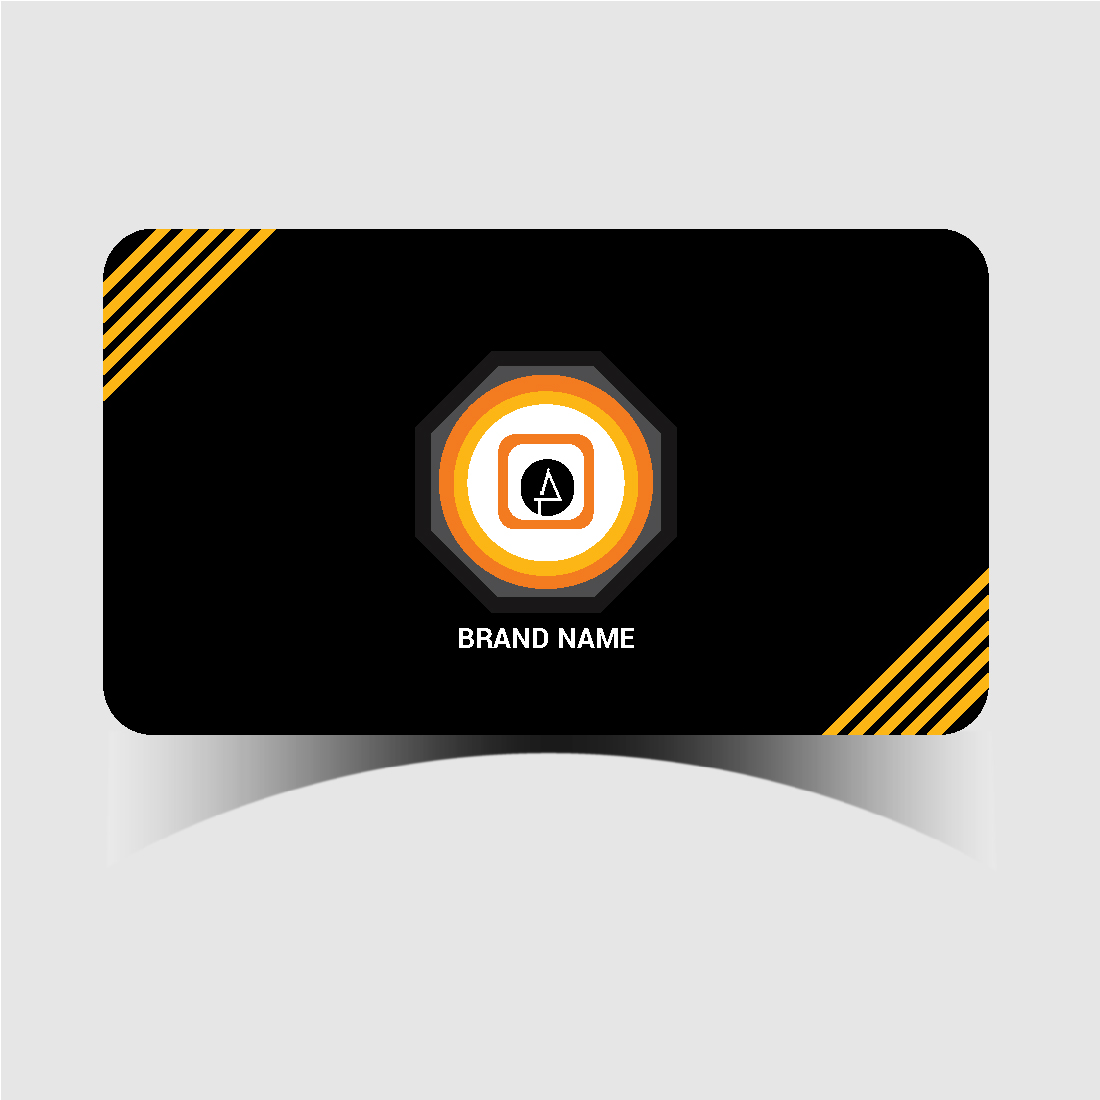 Creative Dark and Yellow Business Card Design Template Cover.